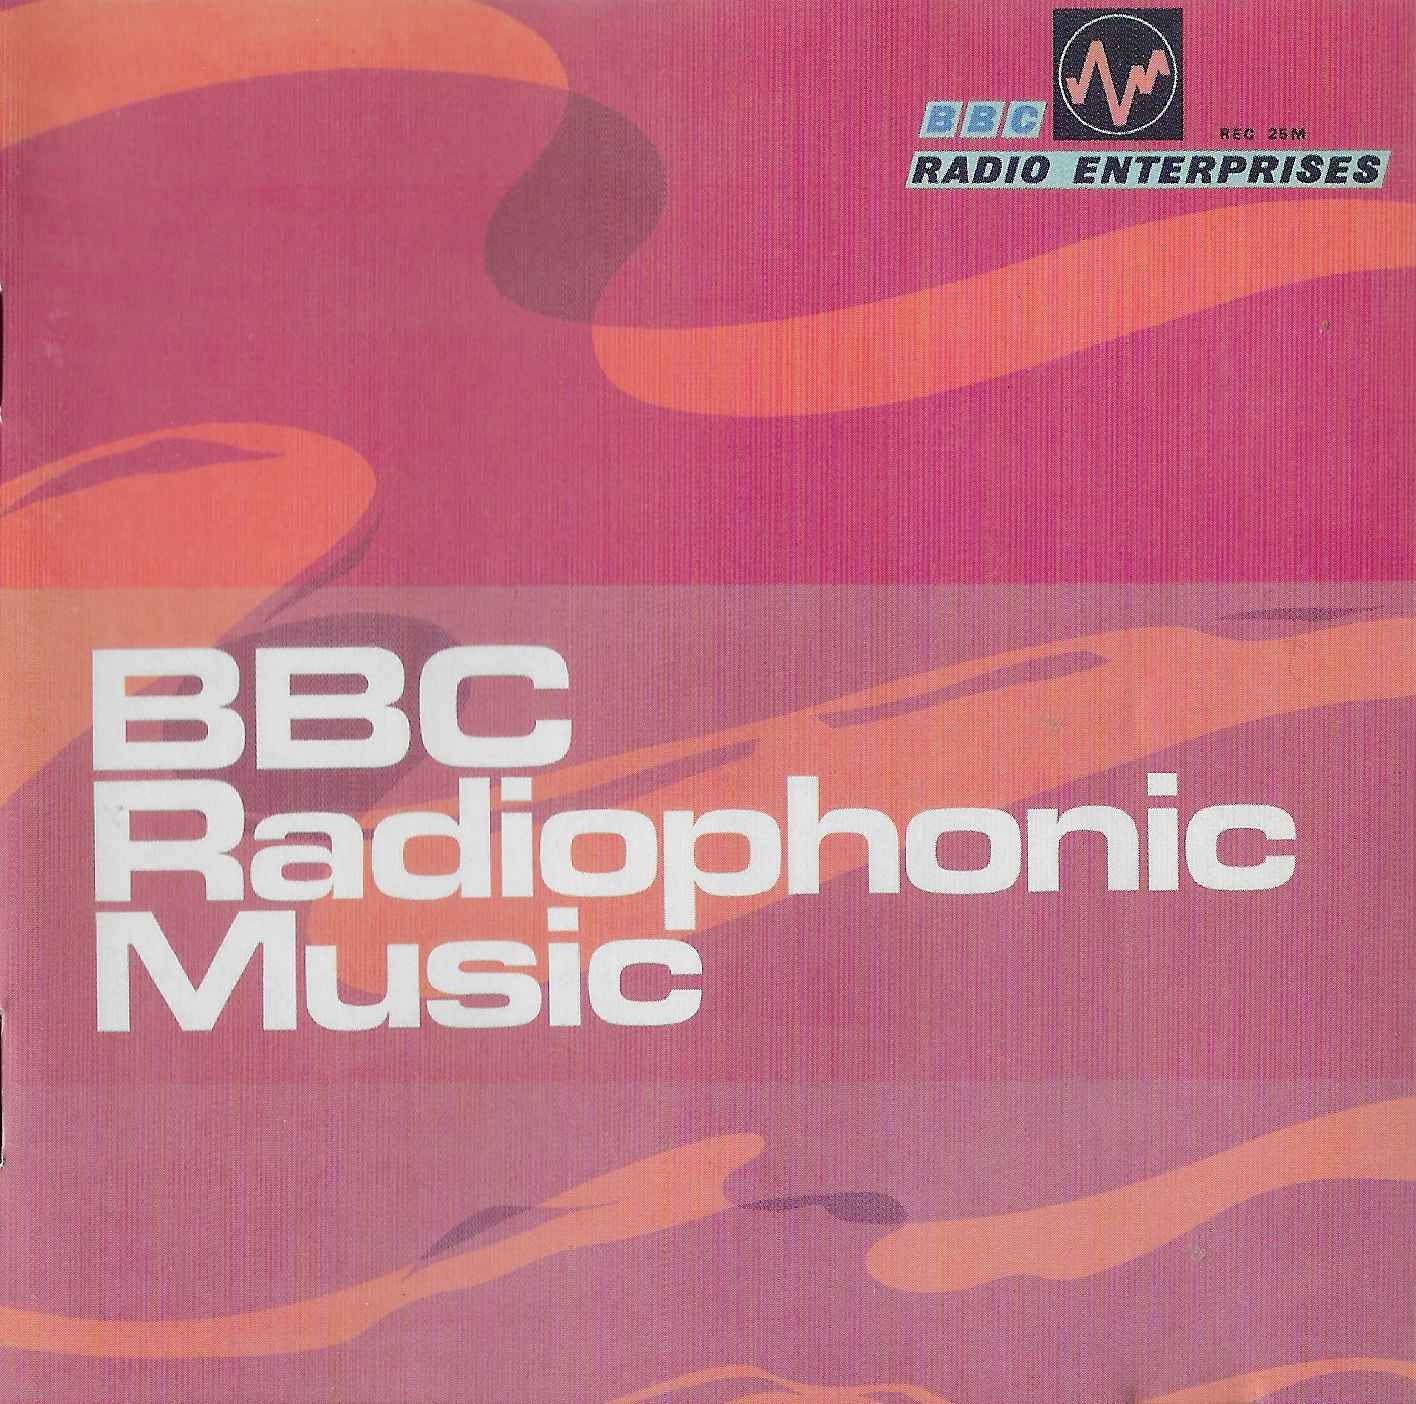 Picture of REC25MCD BBC Radiophonic music by artist David Cain / John Baker / Delia Derbyshire from the BBC cds - Records and Tapes library